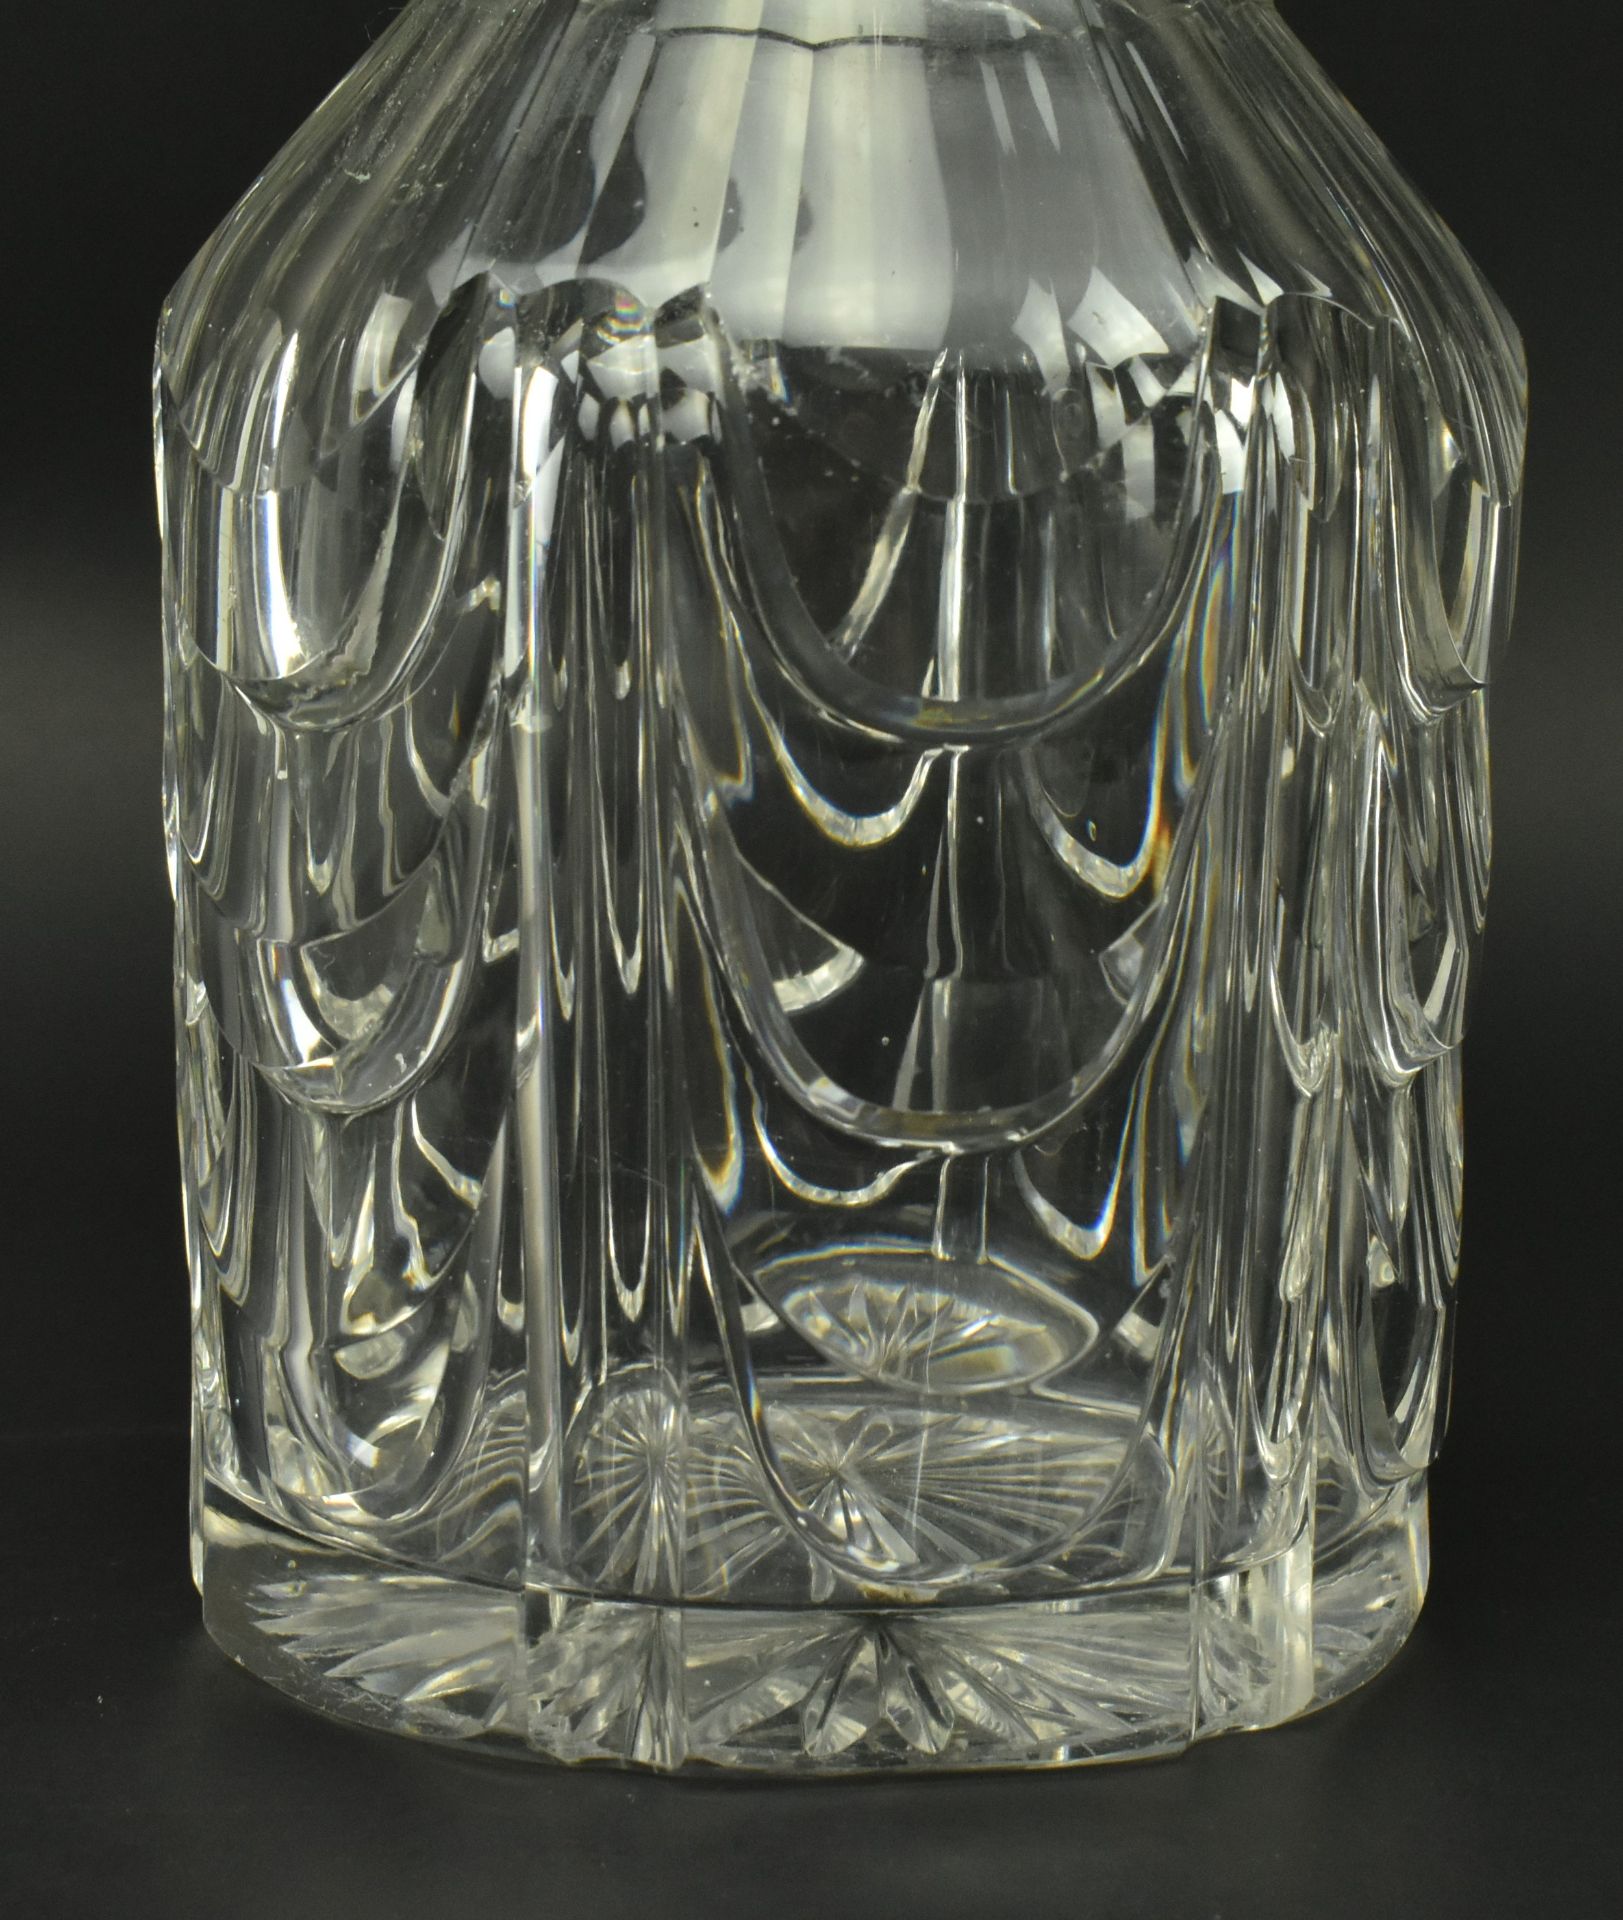 EARLY 19TH CENTURY HEAVY GLASS DECANTER, HOLLOW STOPPER - Image 6 of 8